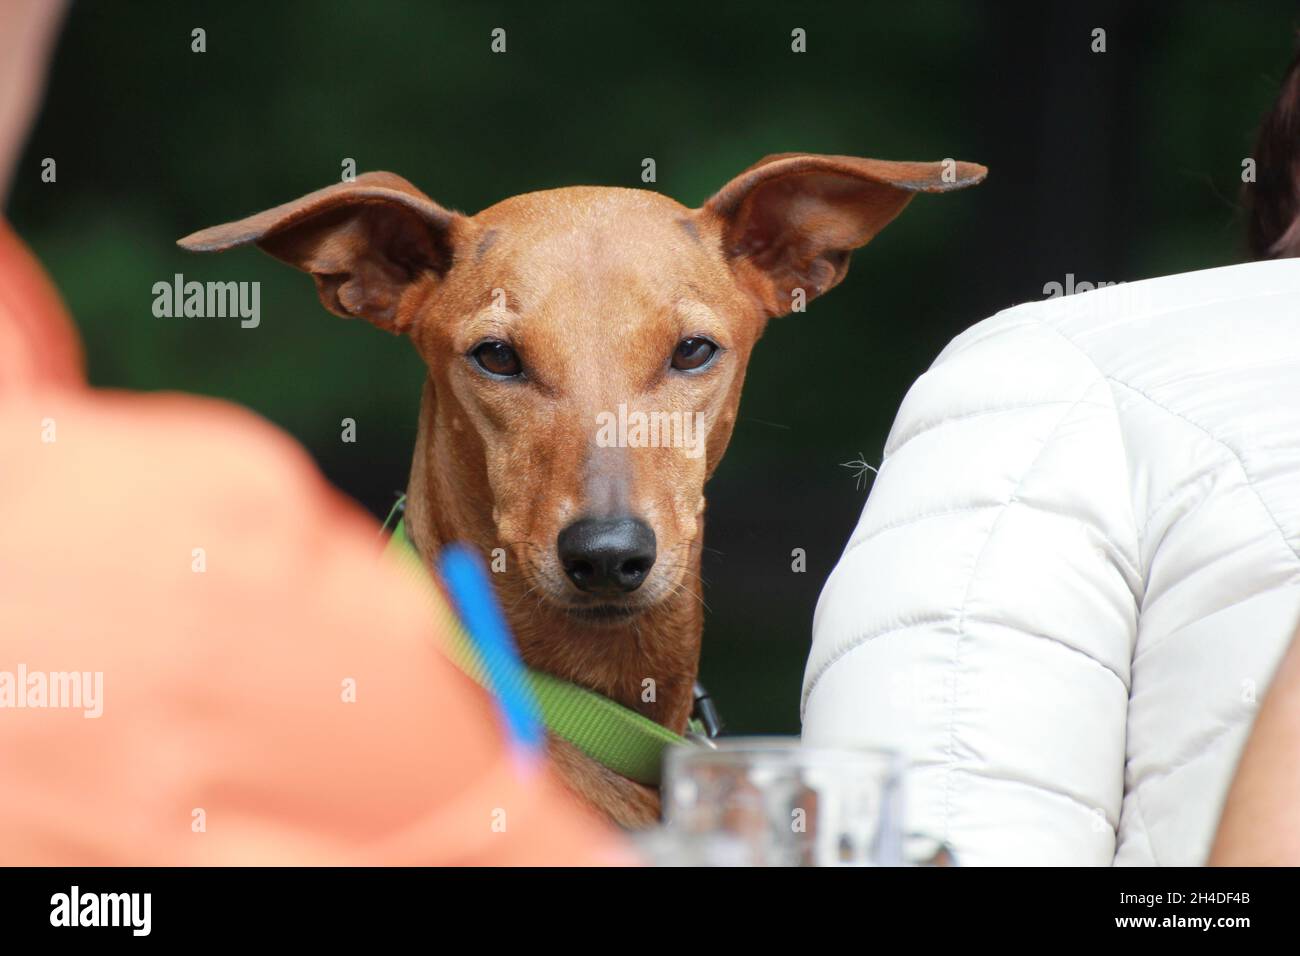 BREMEN, GERMANY - Oct 07, 2021: pinscher is a breed of doghe has brown fur and a green and blue collar Stock Photo